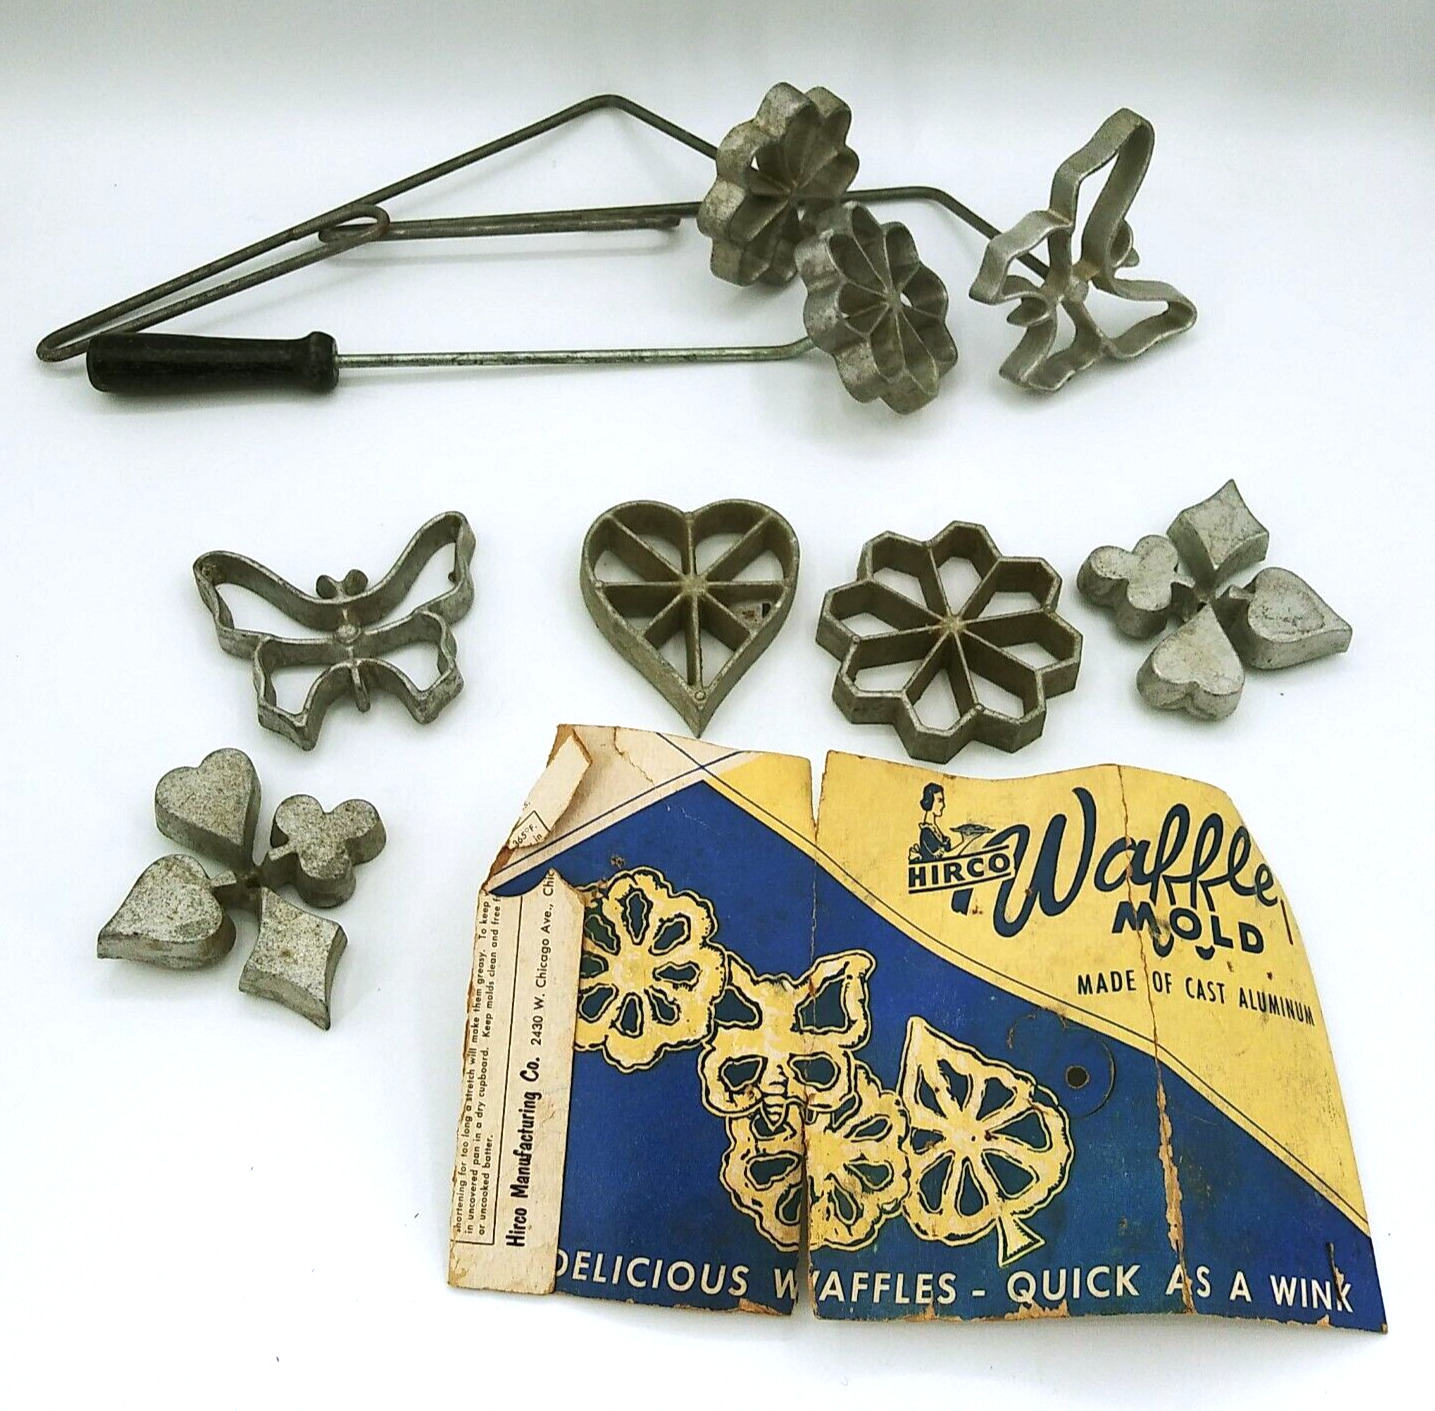 Vintage 11 pc Rosette Iron Set with 3 Handles 3 Shapes Waffle Molds Cake Cookie